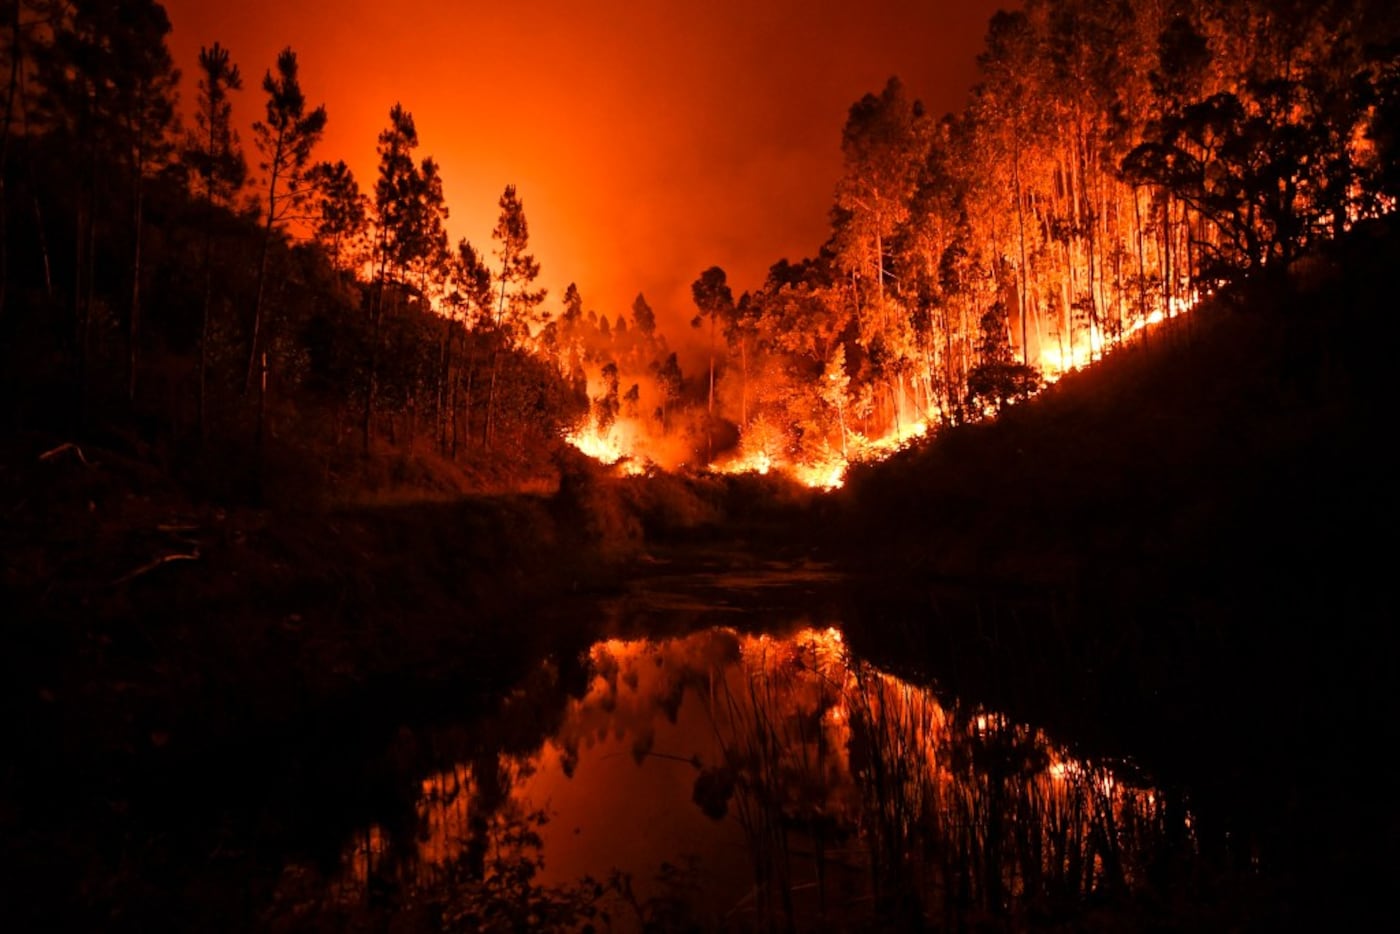 A wildfire is reflected in a stream at Penela, Coimbra, central Portugal, on June 18, 2017.